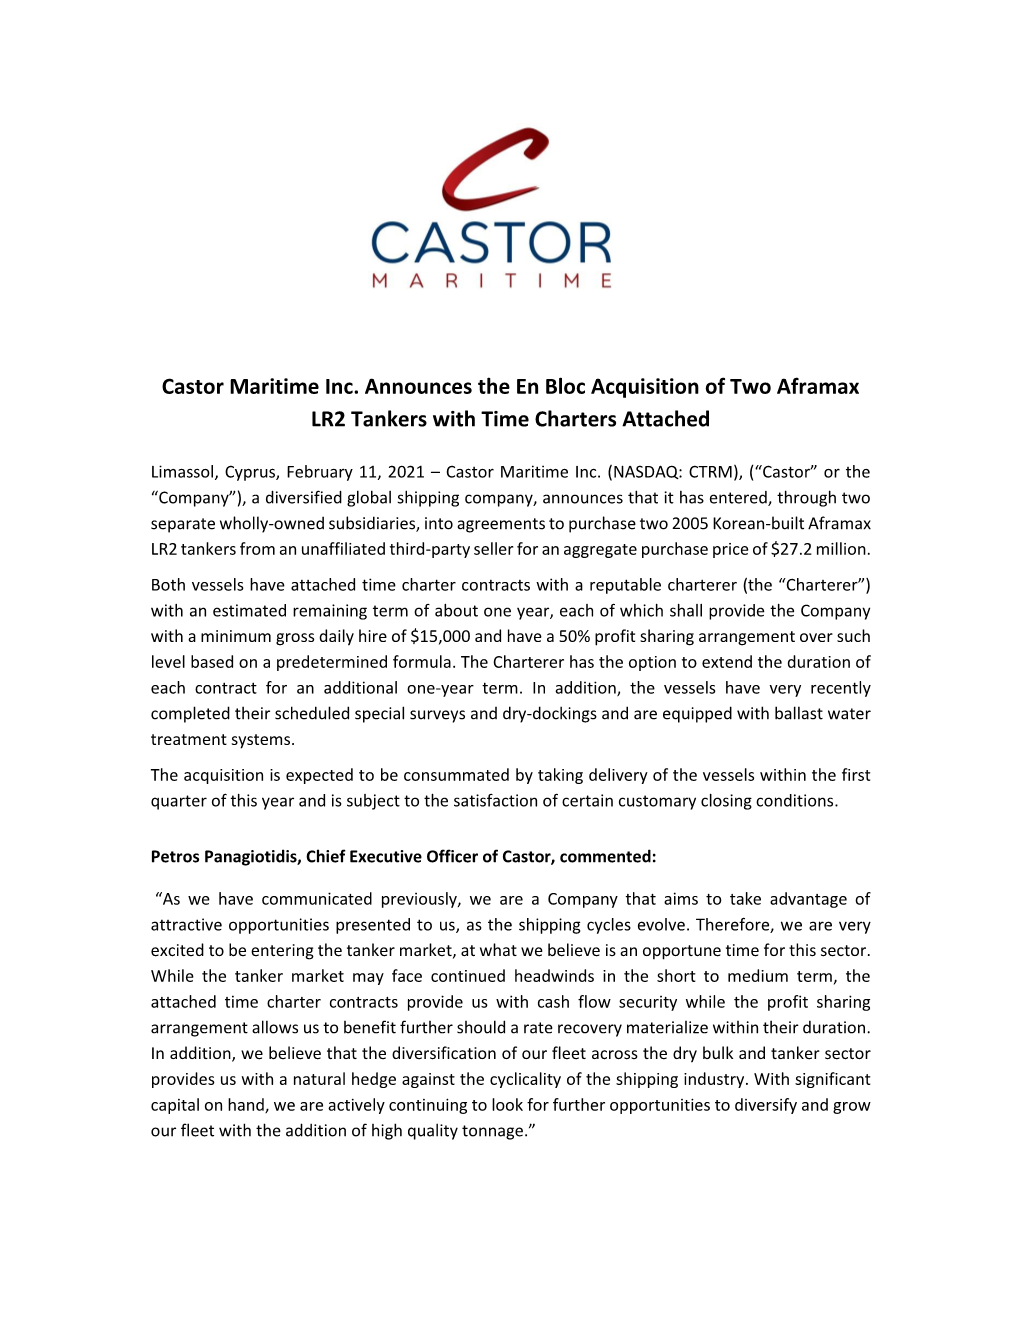 Castor Maritime Inc. Announces the En Bloc Acquisition of Two Aframax LR2 Tankers with Time Charters Attached